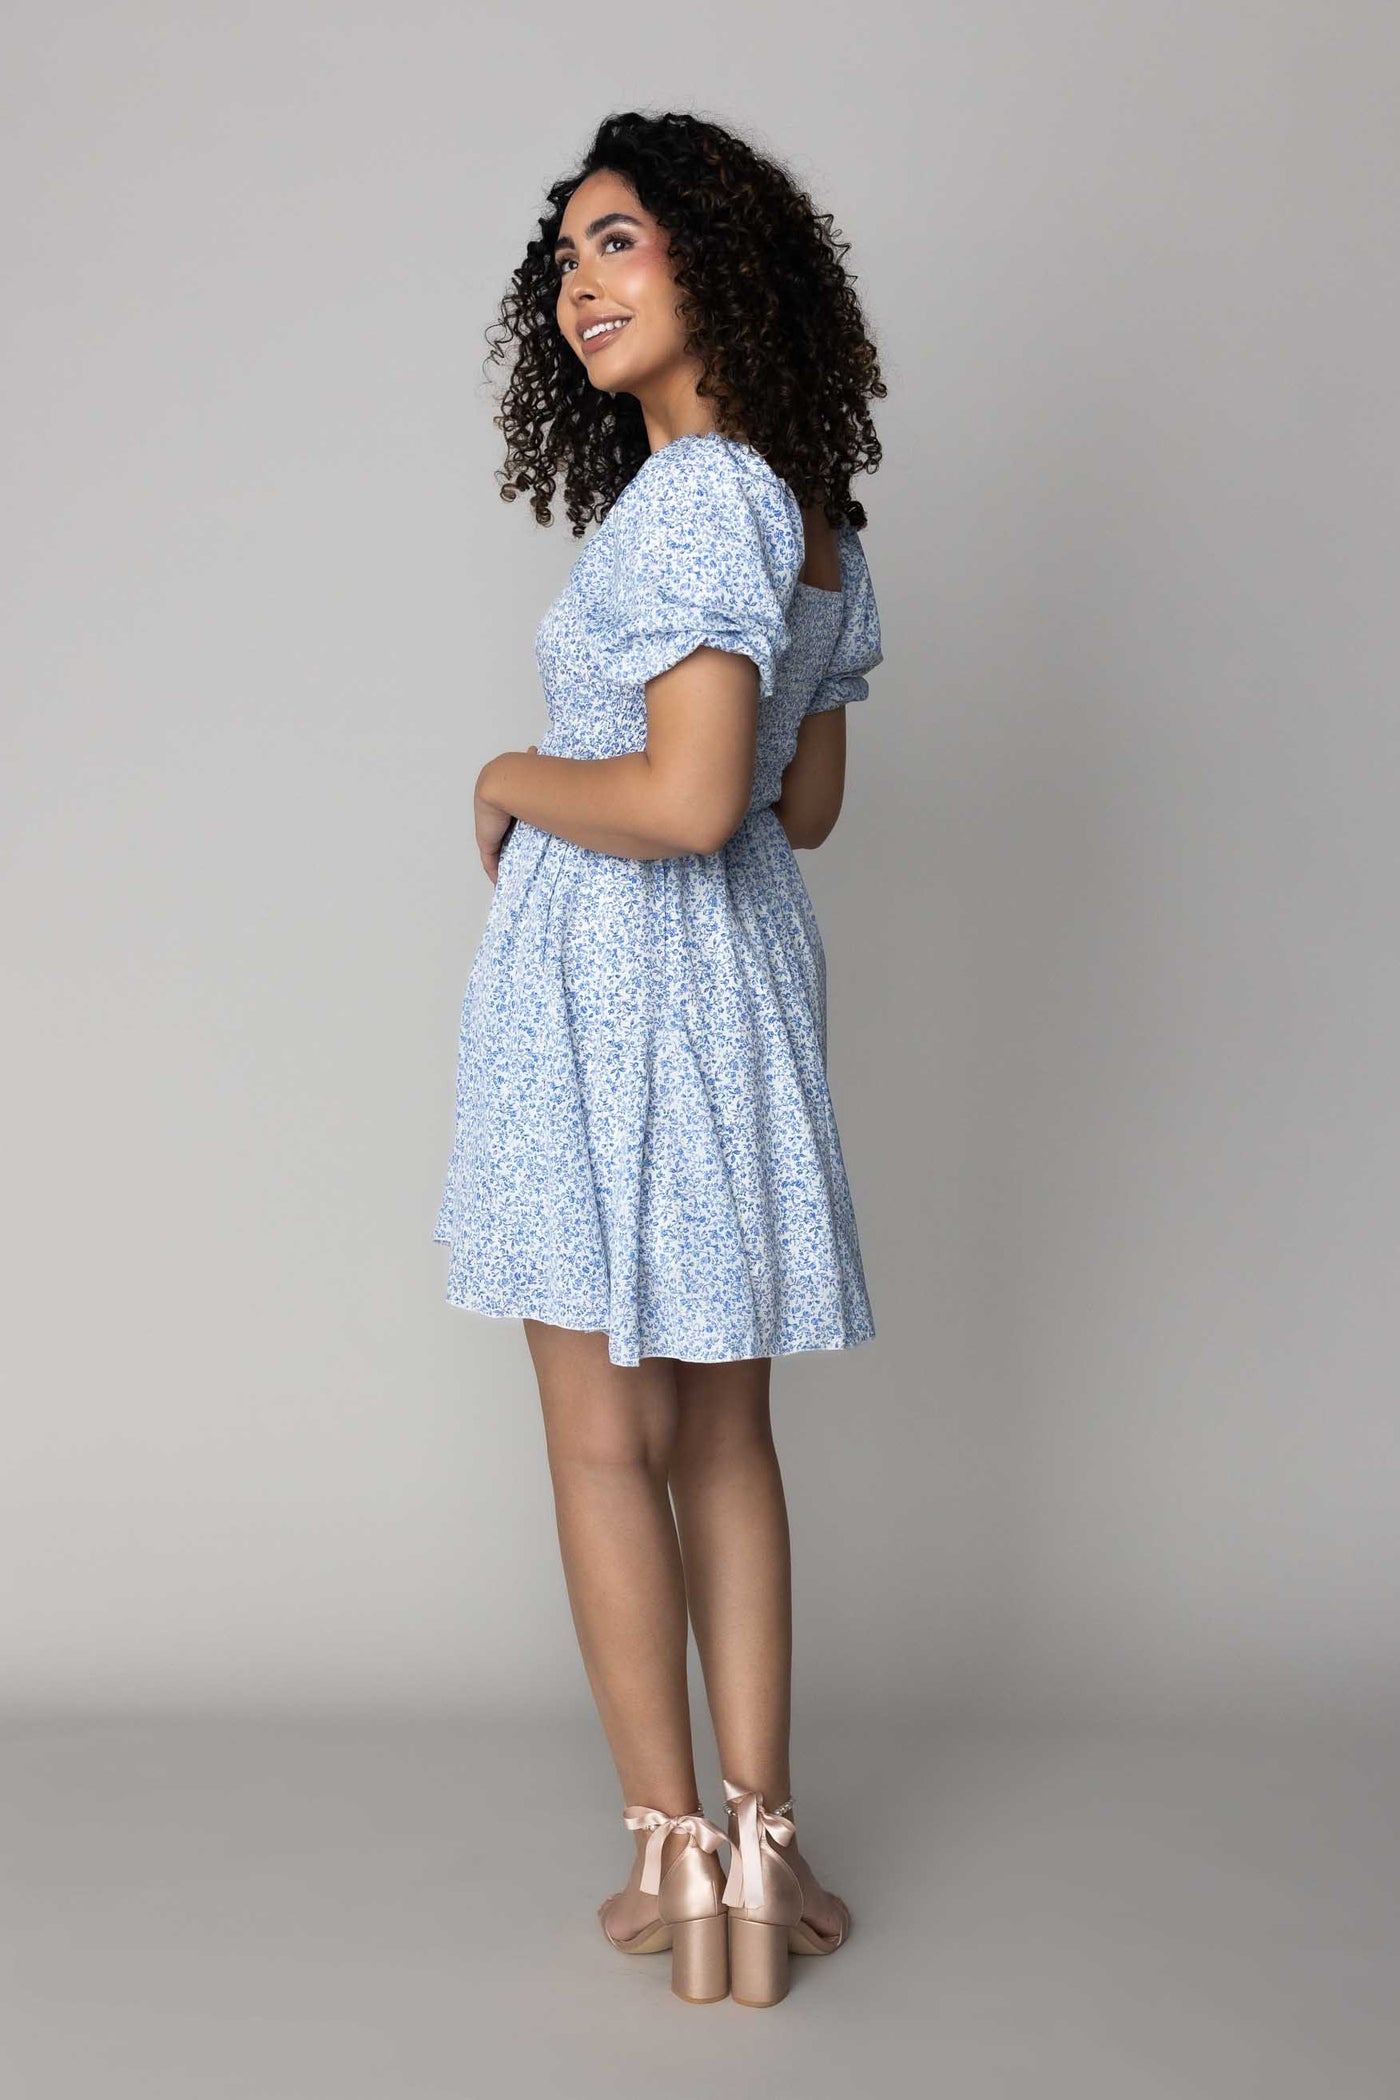 This is a backshot of a modest blue dress with floral details and a smocked back.